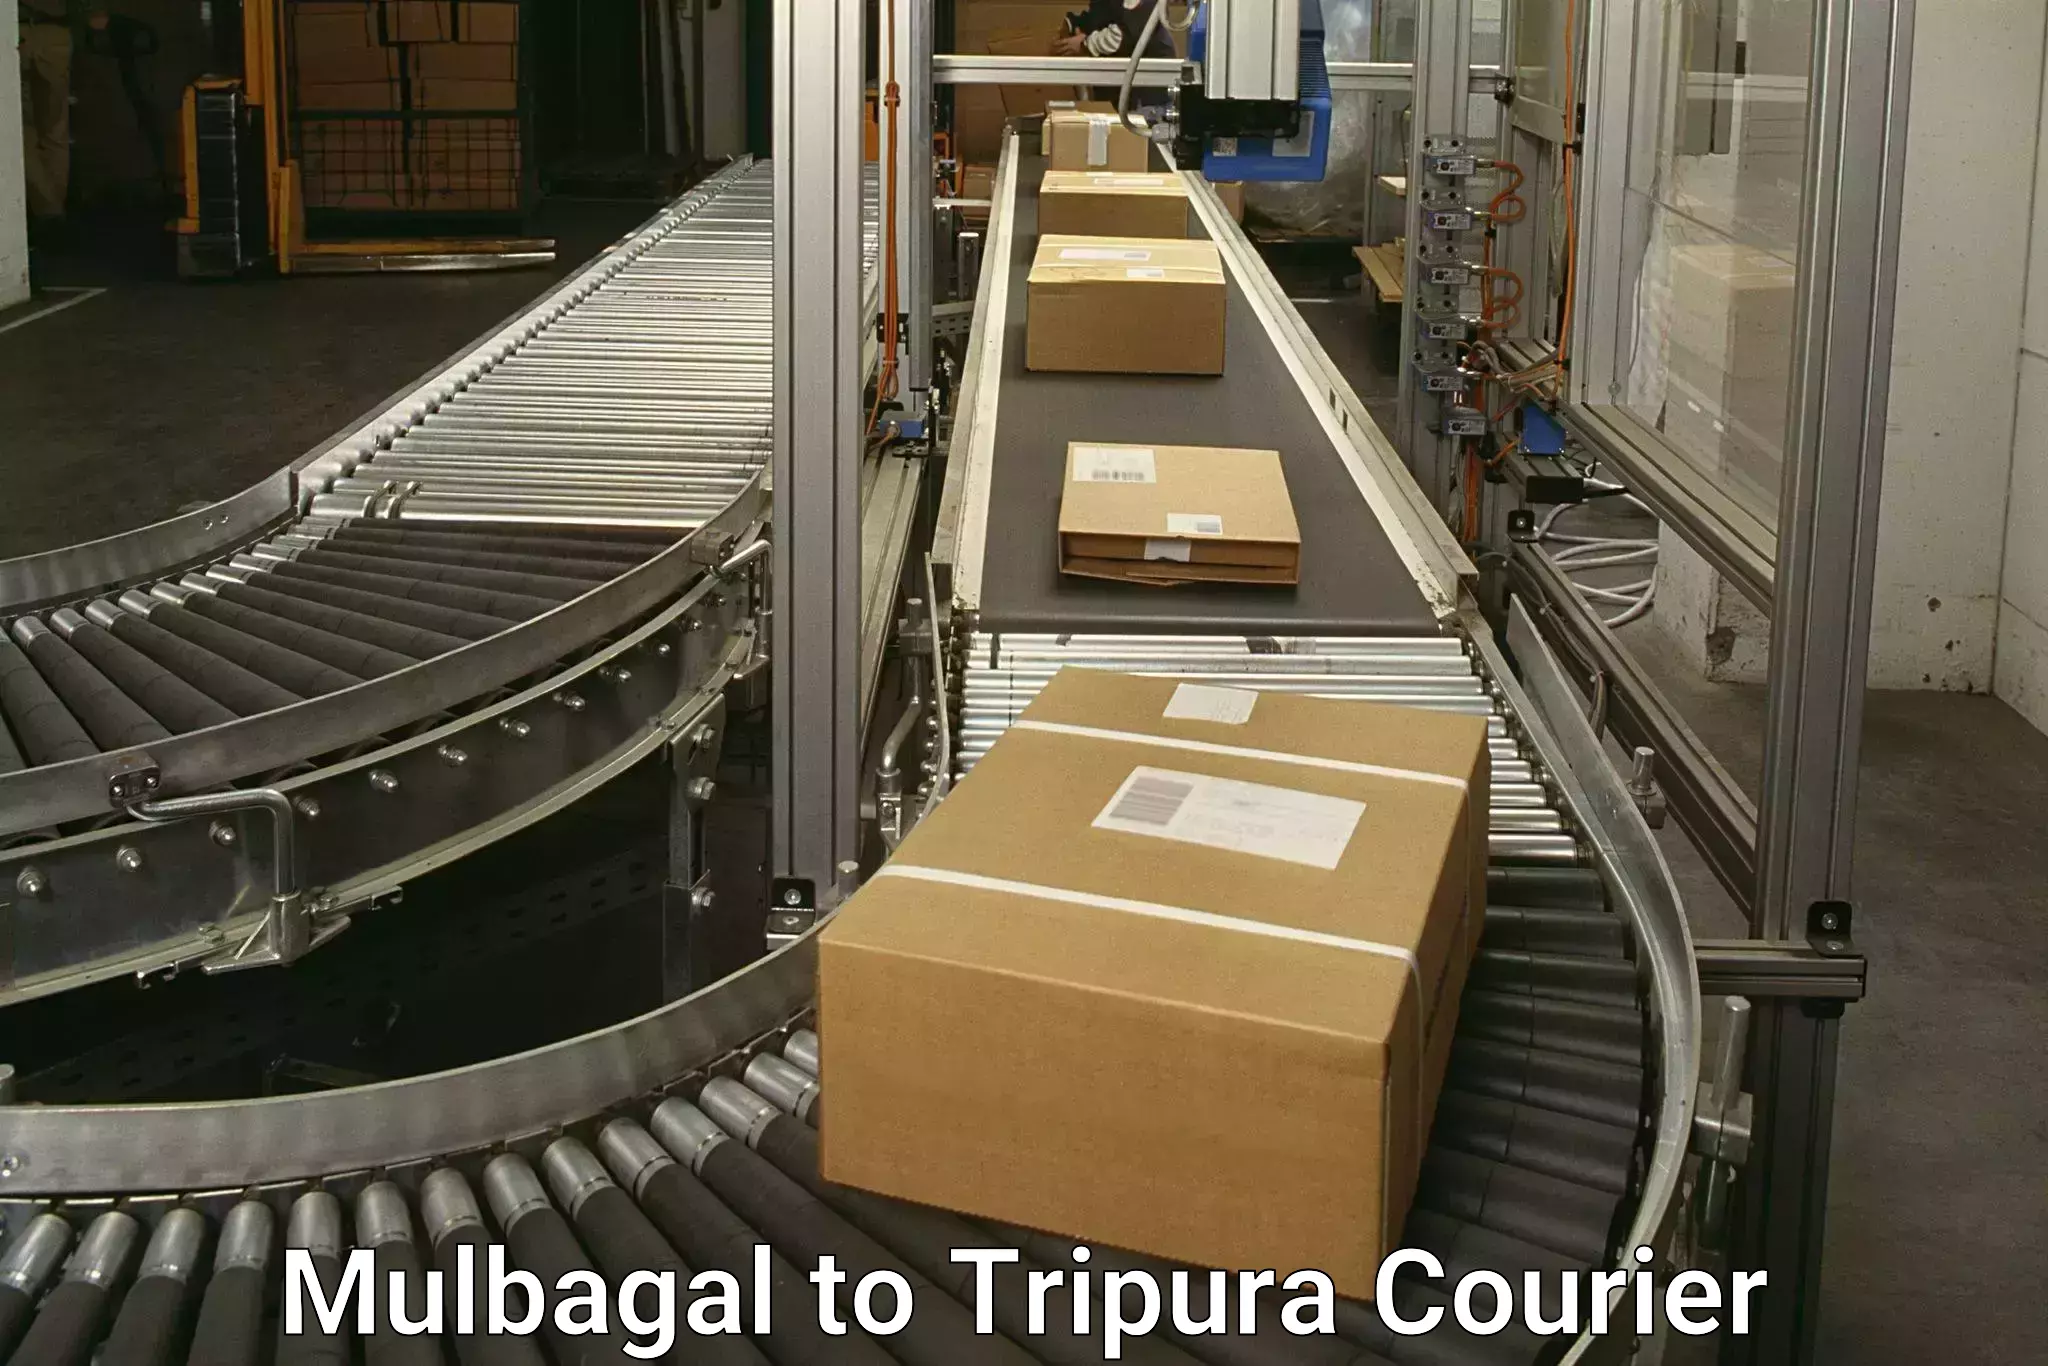 Package delivery network Mulbagal to Udaipur Tripura